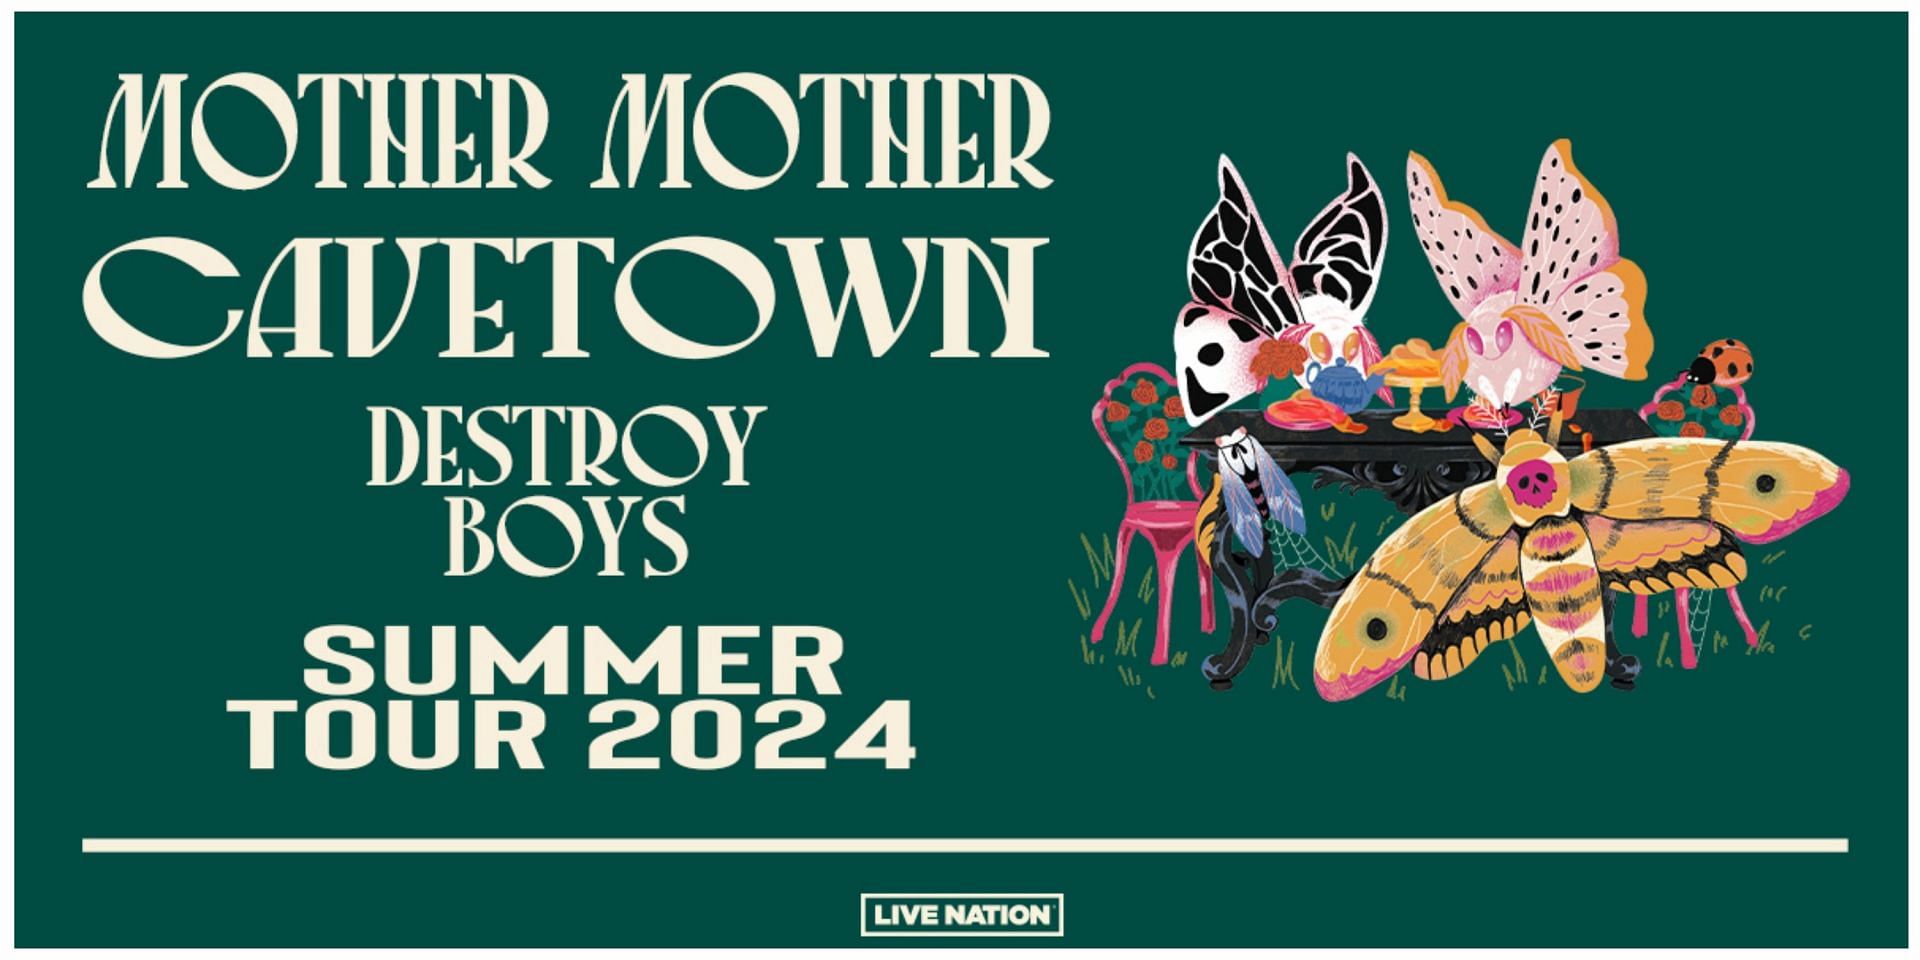 Mother Mother and Cavetown will headline a joint summer tour. (Image via Cavetown, Instagram)